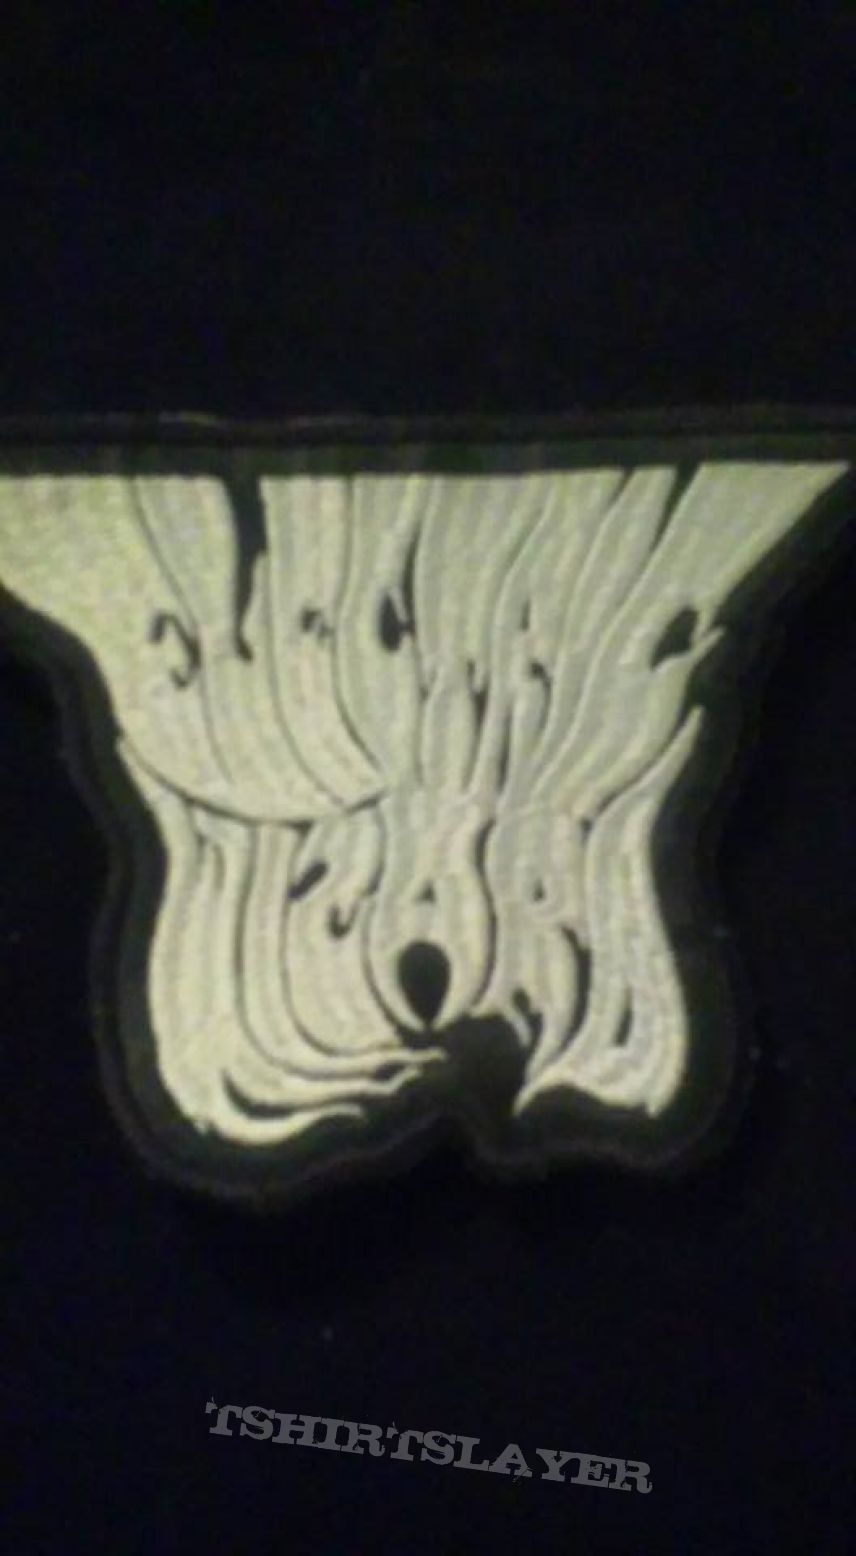 Electric Wizard patch